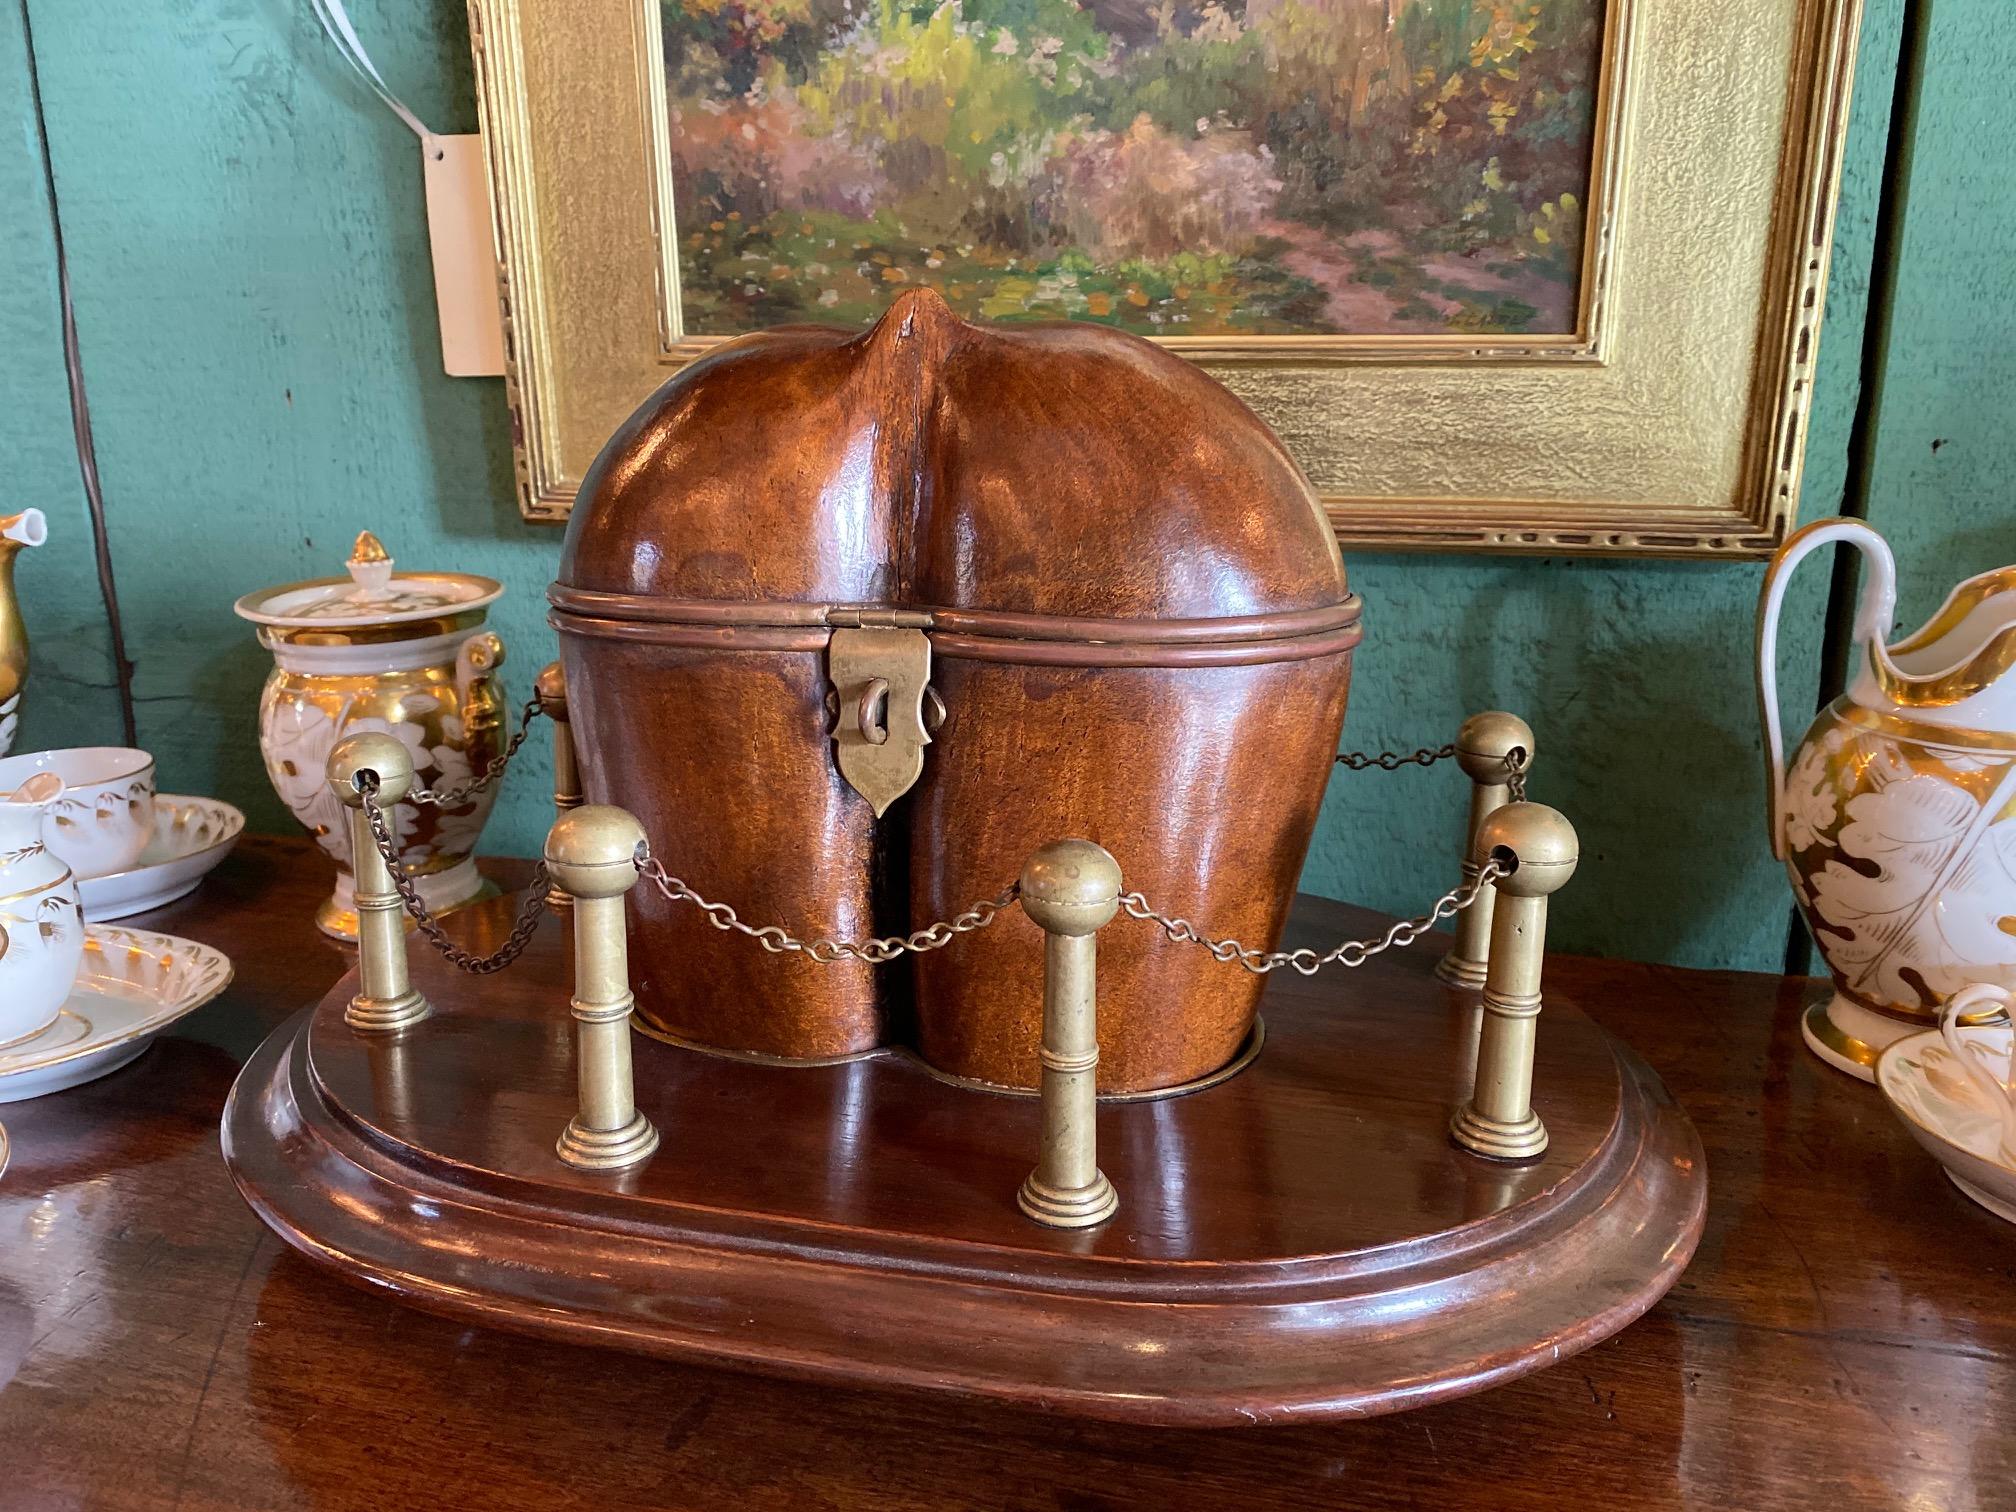 Hand Carved Crafted Fruit Wood Coco Georgian Victorian Tea Caddy Centerpiece LA
Very rare 19th century George III to Victorian coco nut “Coco de Mer” palm nut tea caddy on a stand surrounded by Brass columns and chains. The brass on the Nut itself